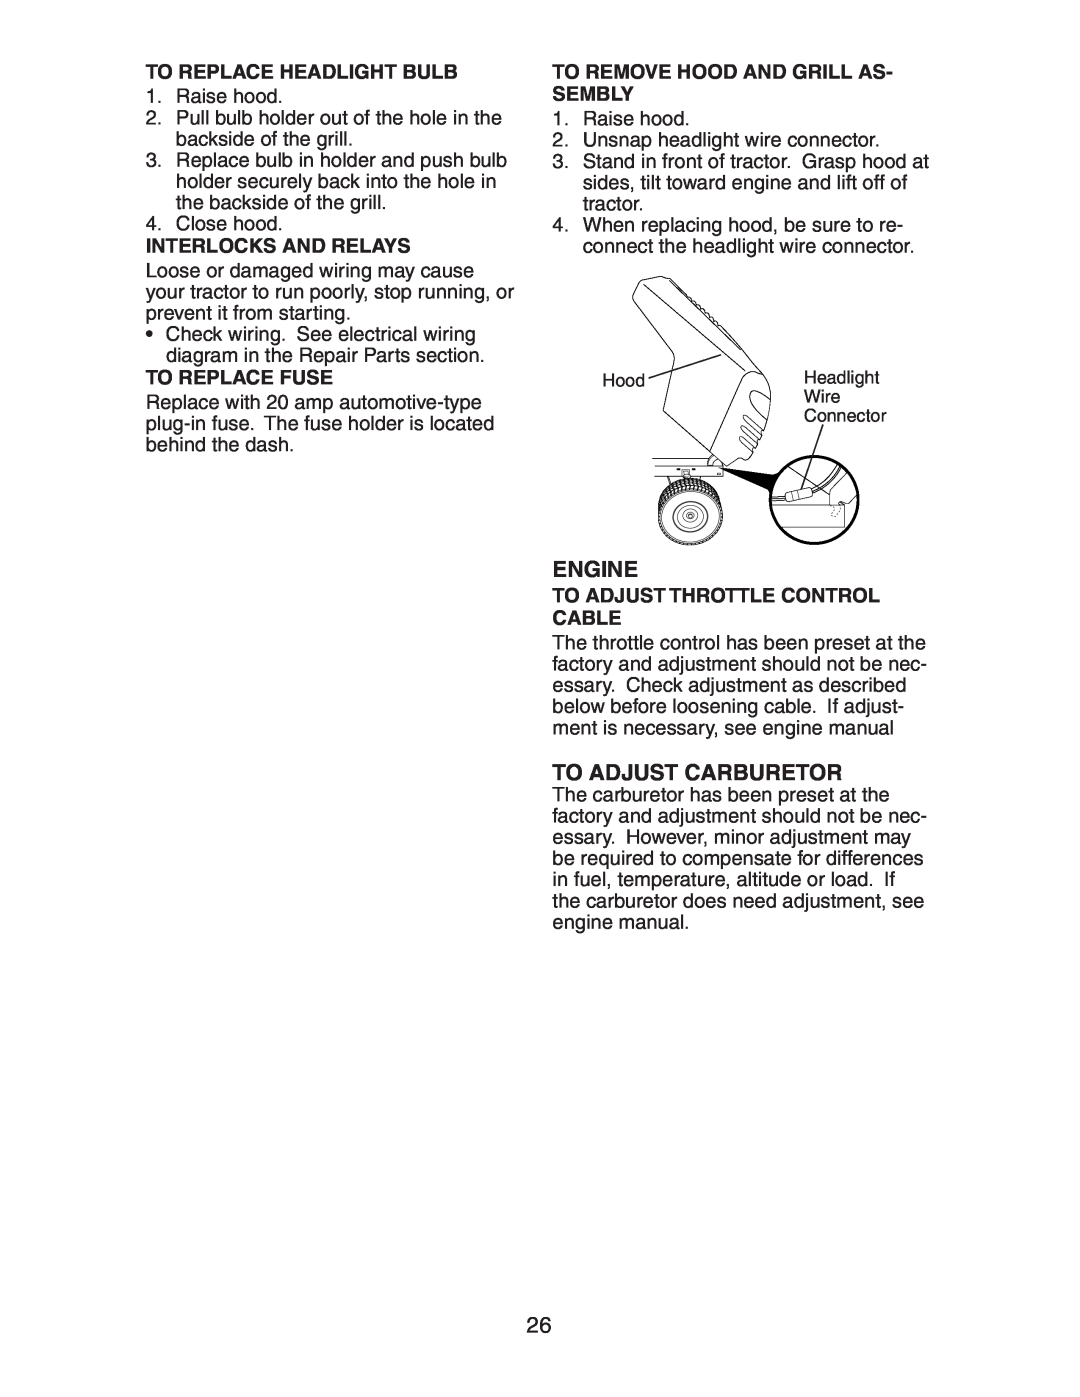 Electrolux AG15538B manual To Adjust Carburetor, To Replace Headlight Bulb, Interlocks And Relays, To Replace Fuse, Engine 